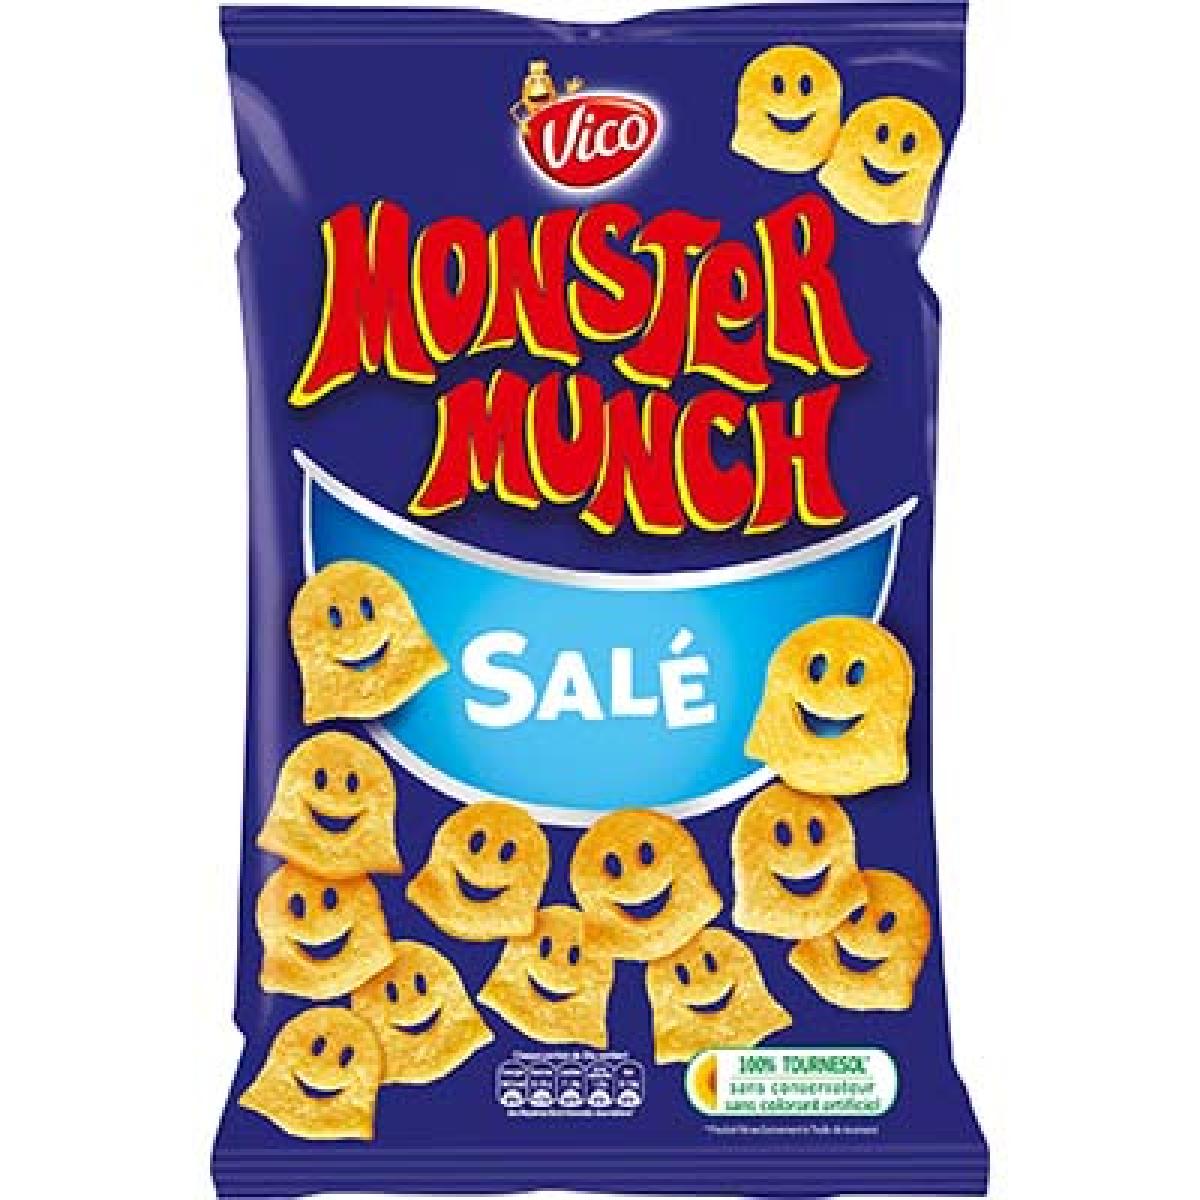 MUNSTER MUNCH SALE85 VICO